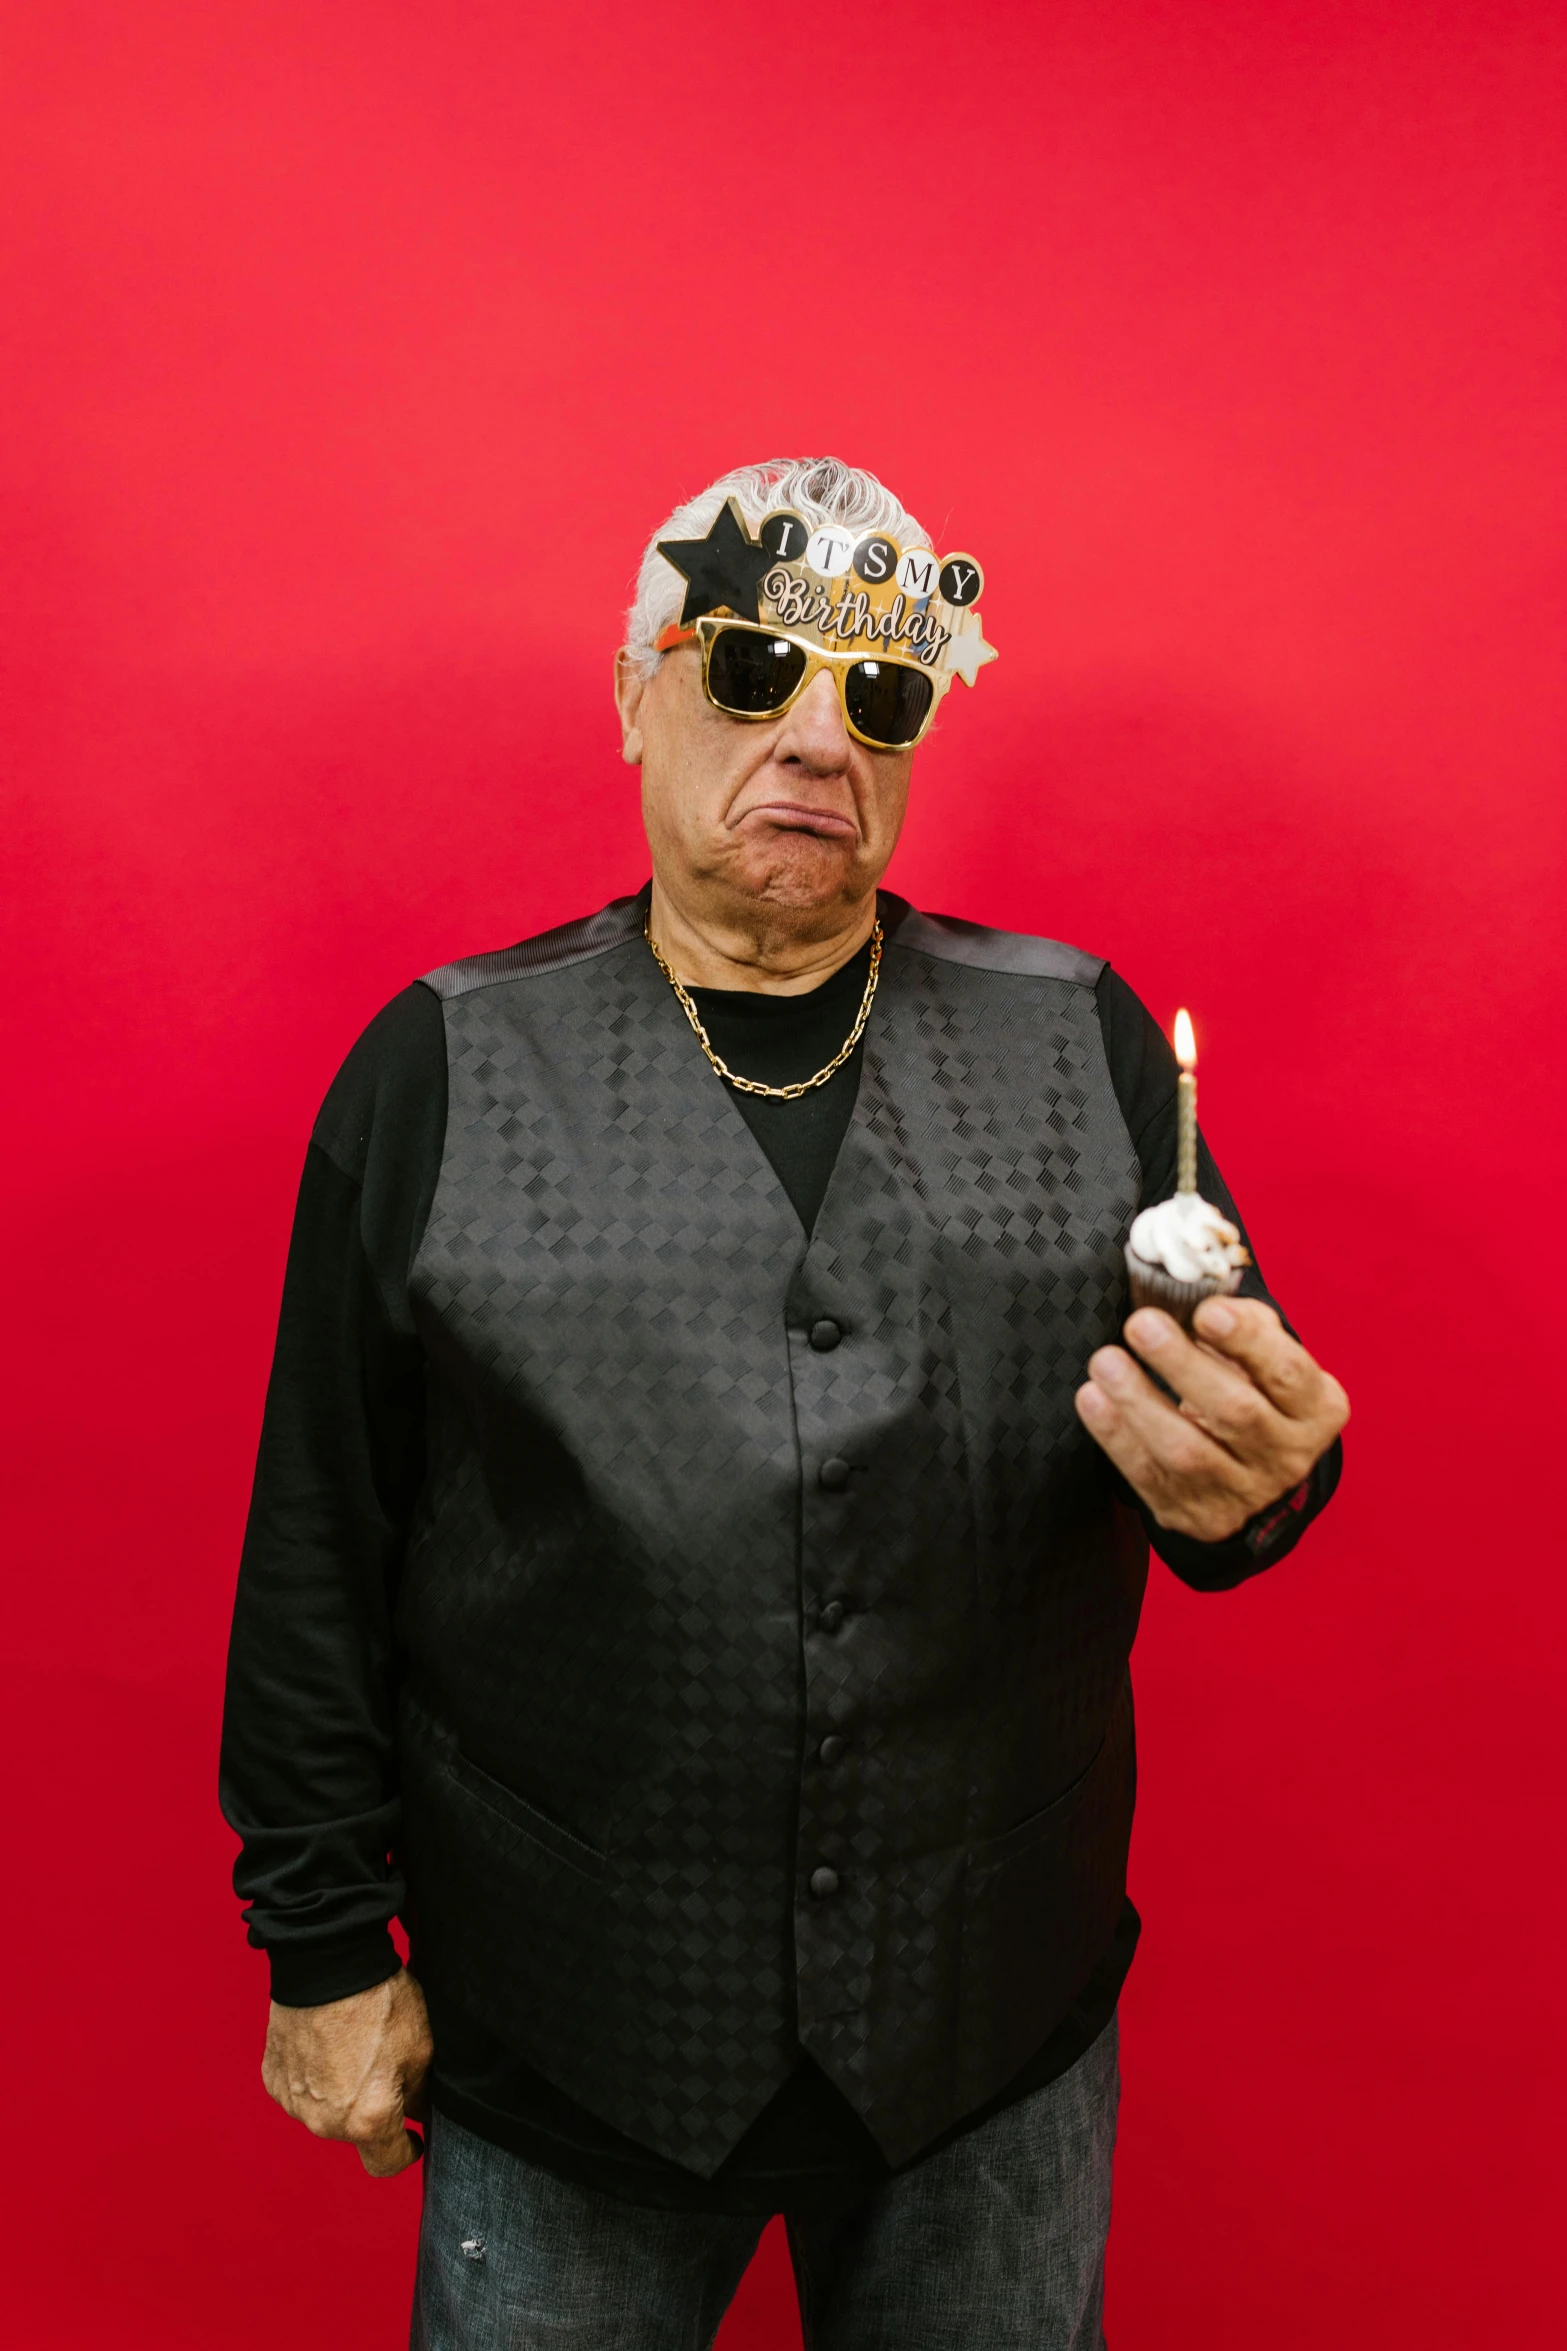 a man standing in front of a red wall holding a cigarette, wearing a party hat, wearing gold glasses, danny de vito, profile image